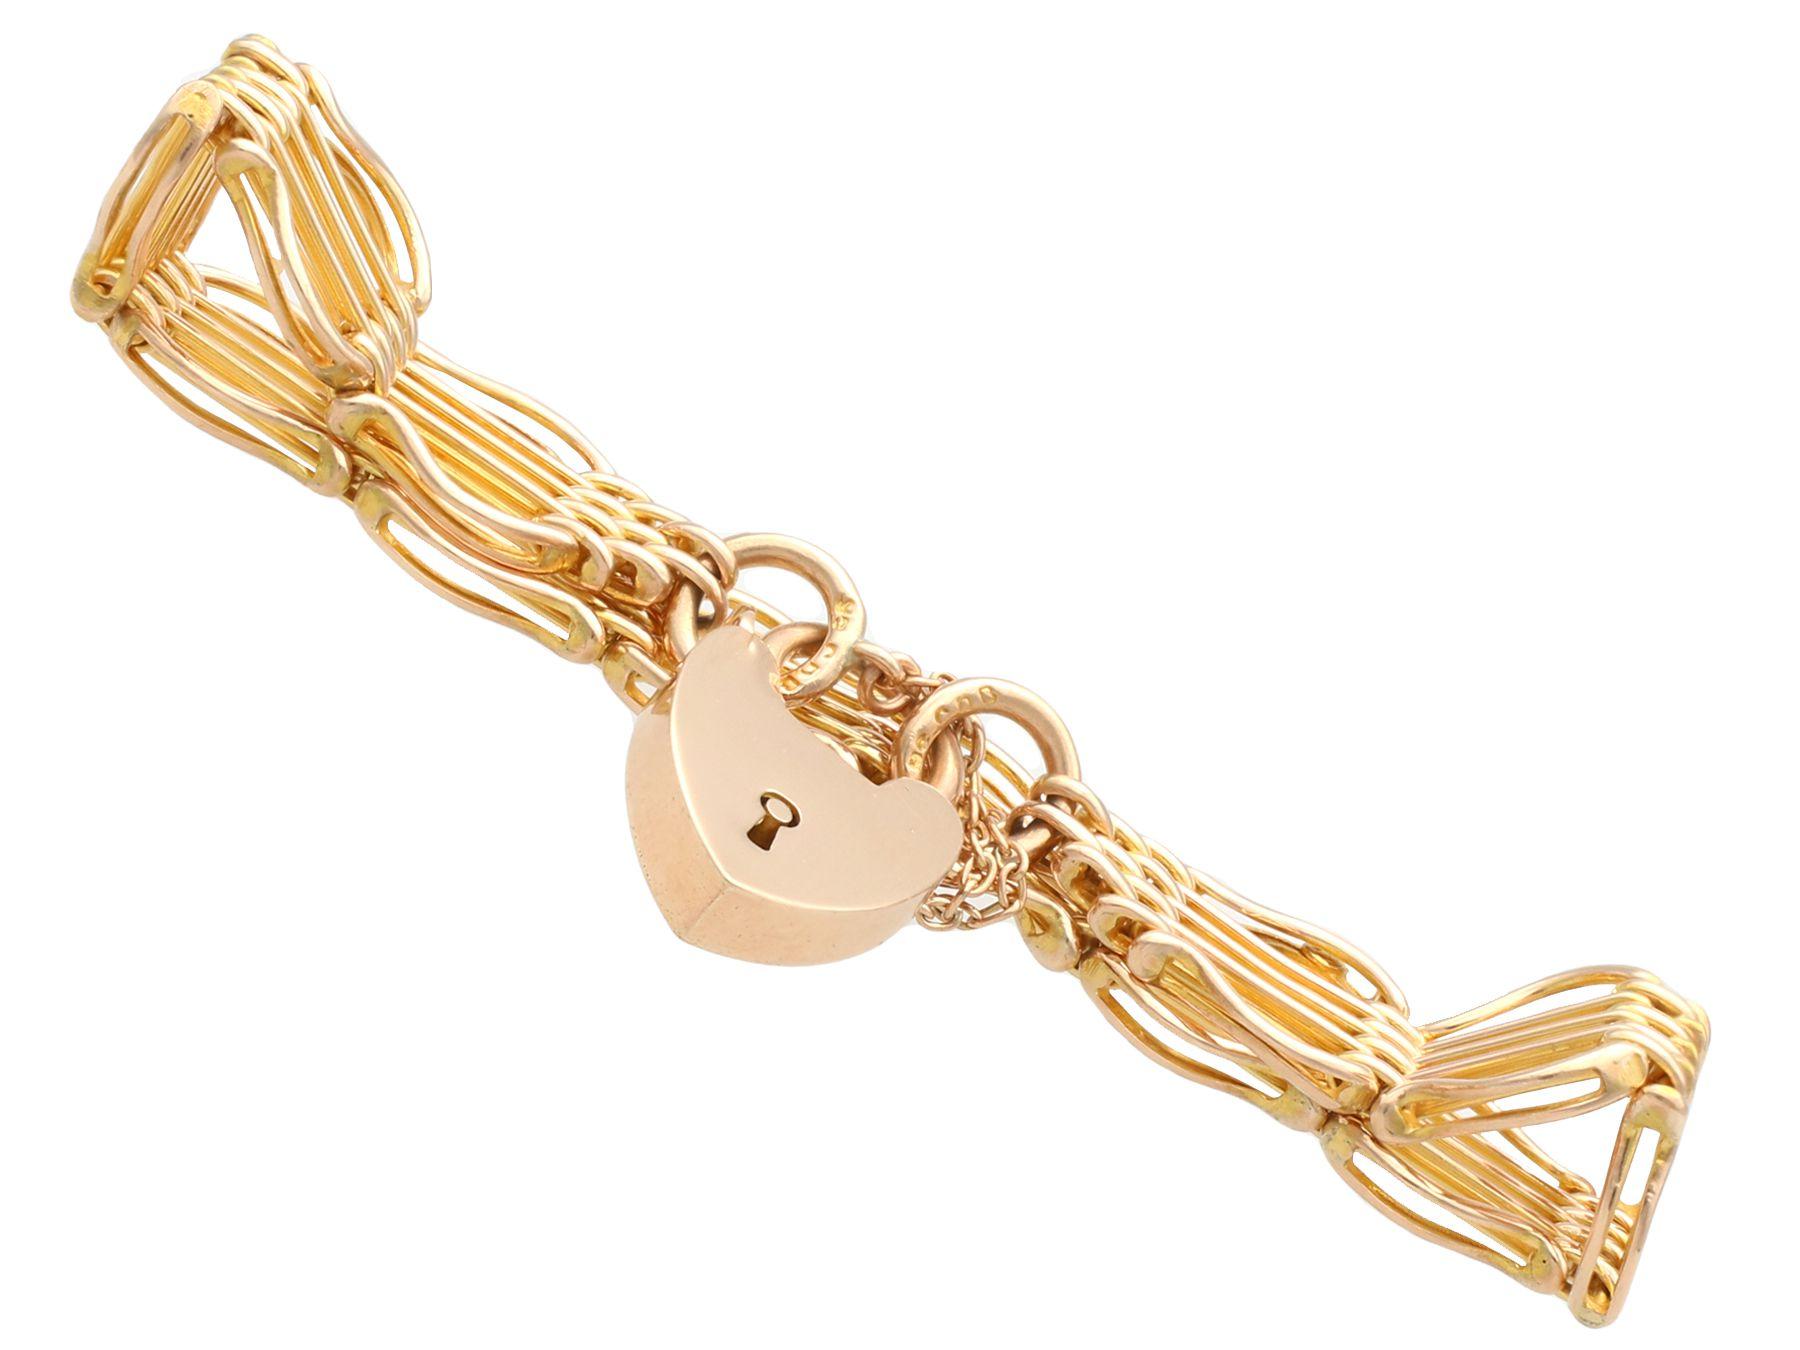 An exceptional, fine and impressive 9 karat yellow gold heart padlock 5 bar gate bracelet; part of our diverse antique jewellery collections.

This exceptional, fine and impressive antique bracelet has been crafted in 9k yellow gold.

The gate